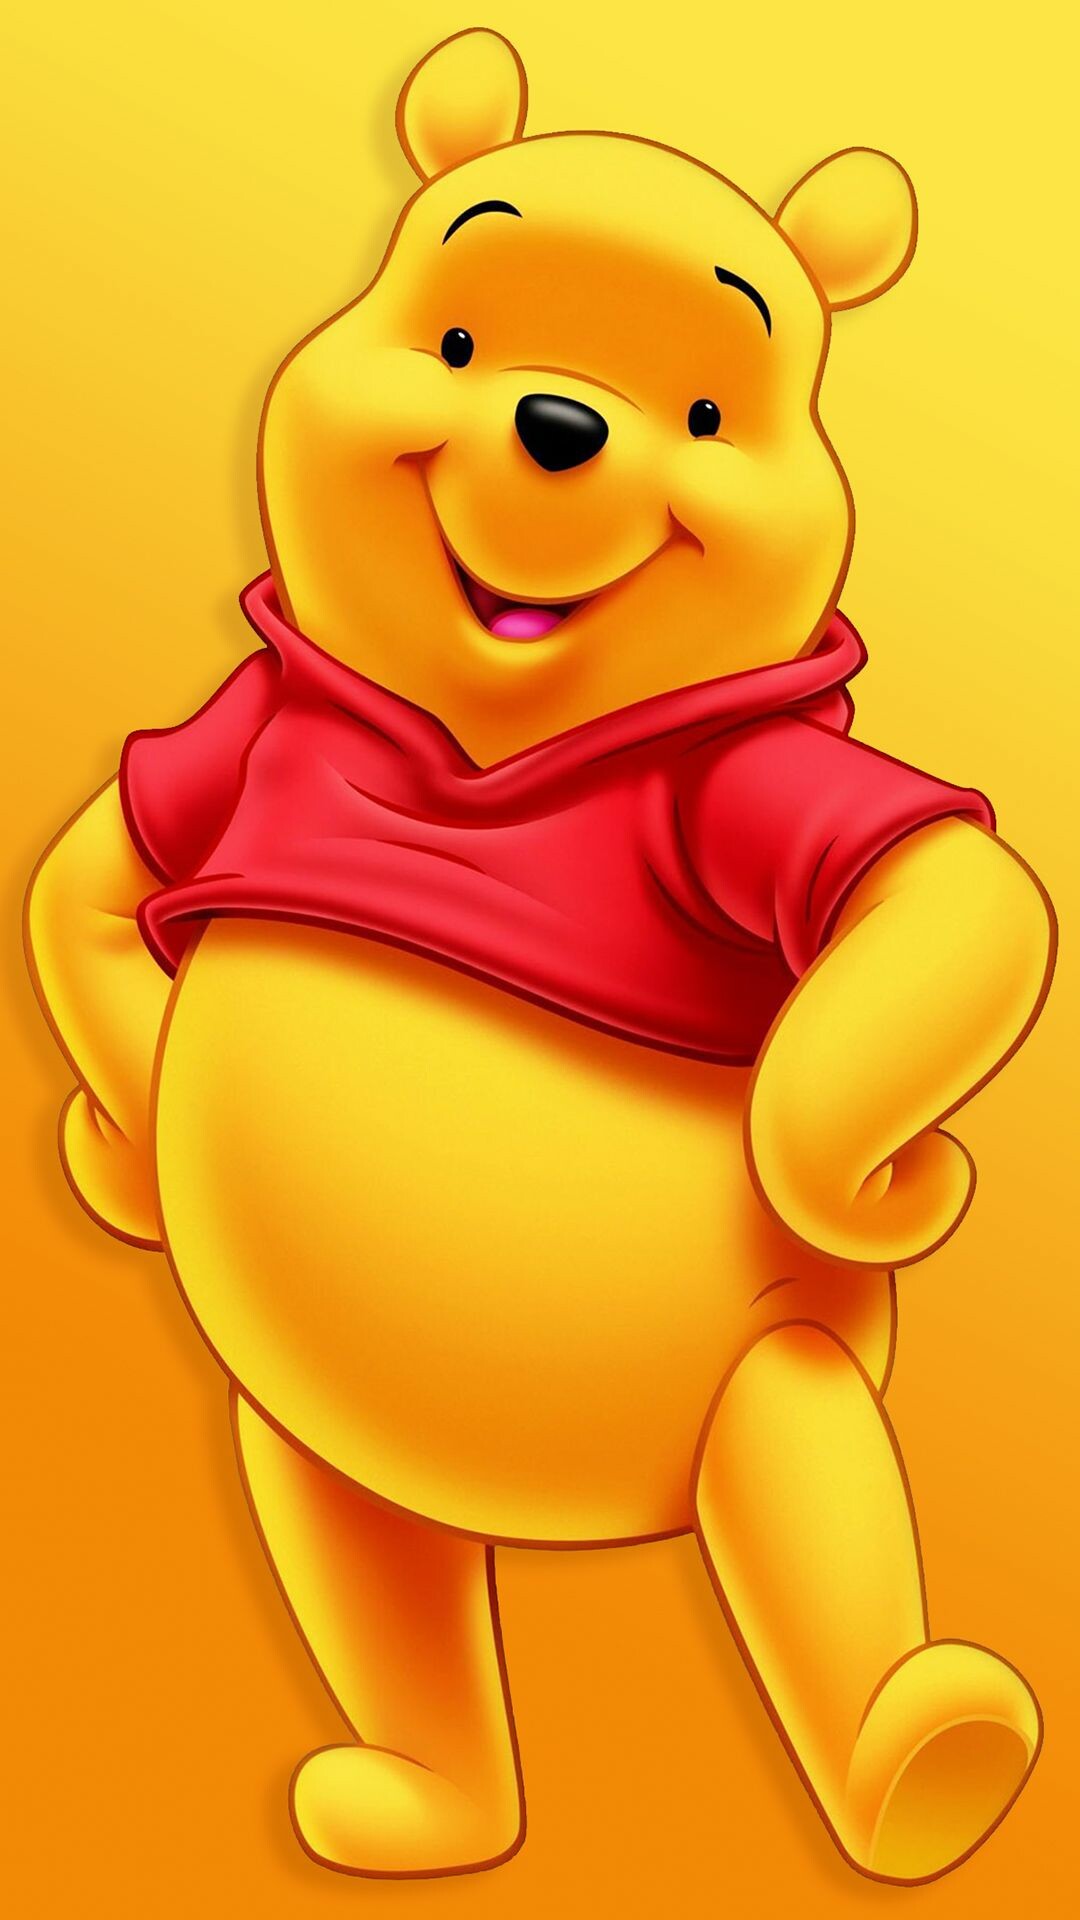 The Many Adventures of Winnie the Pooh: A good-natured, yellow-furred, honey-loving bear who lives in the Forest surrounding the Hundred Acre Wood. 1080x1920 Full HD Wallpaper.